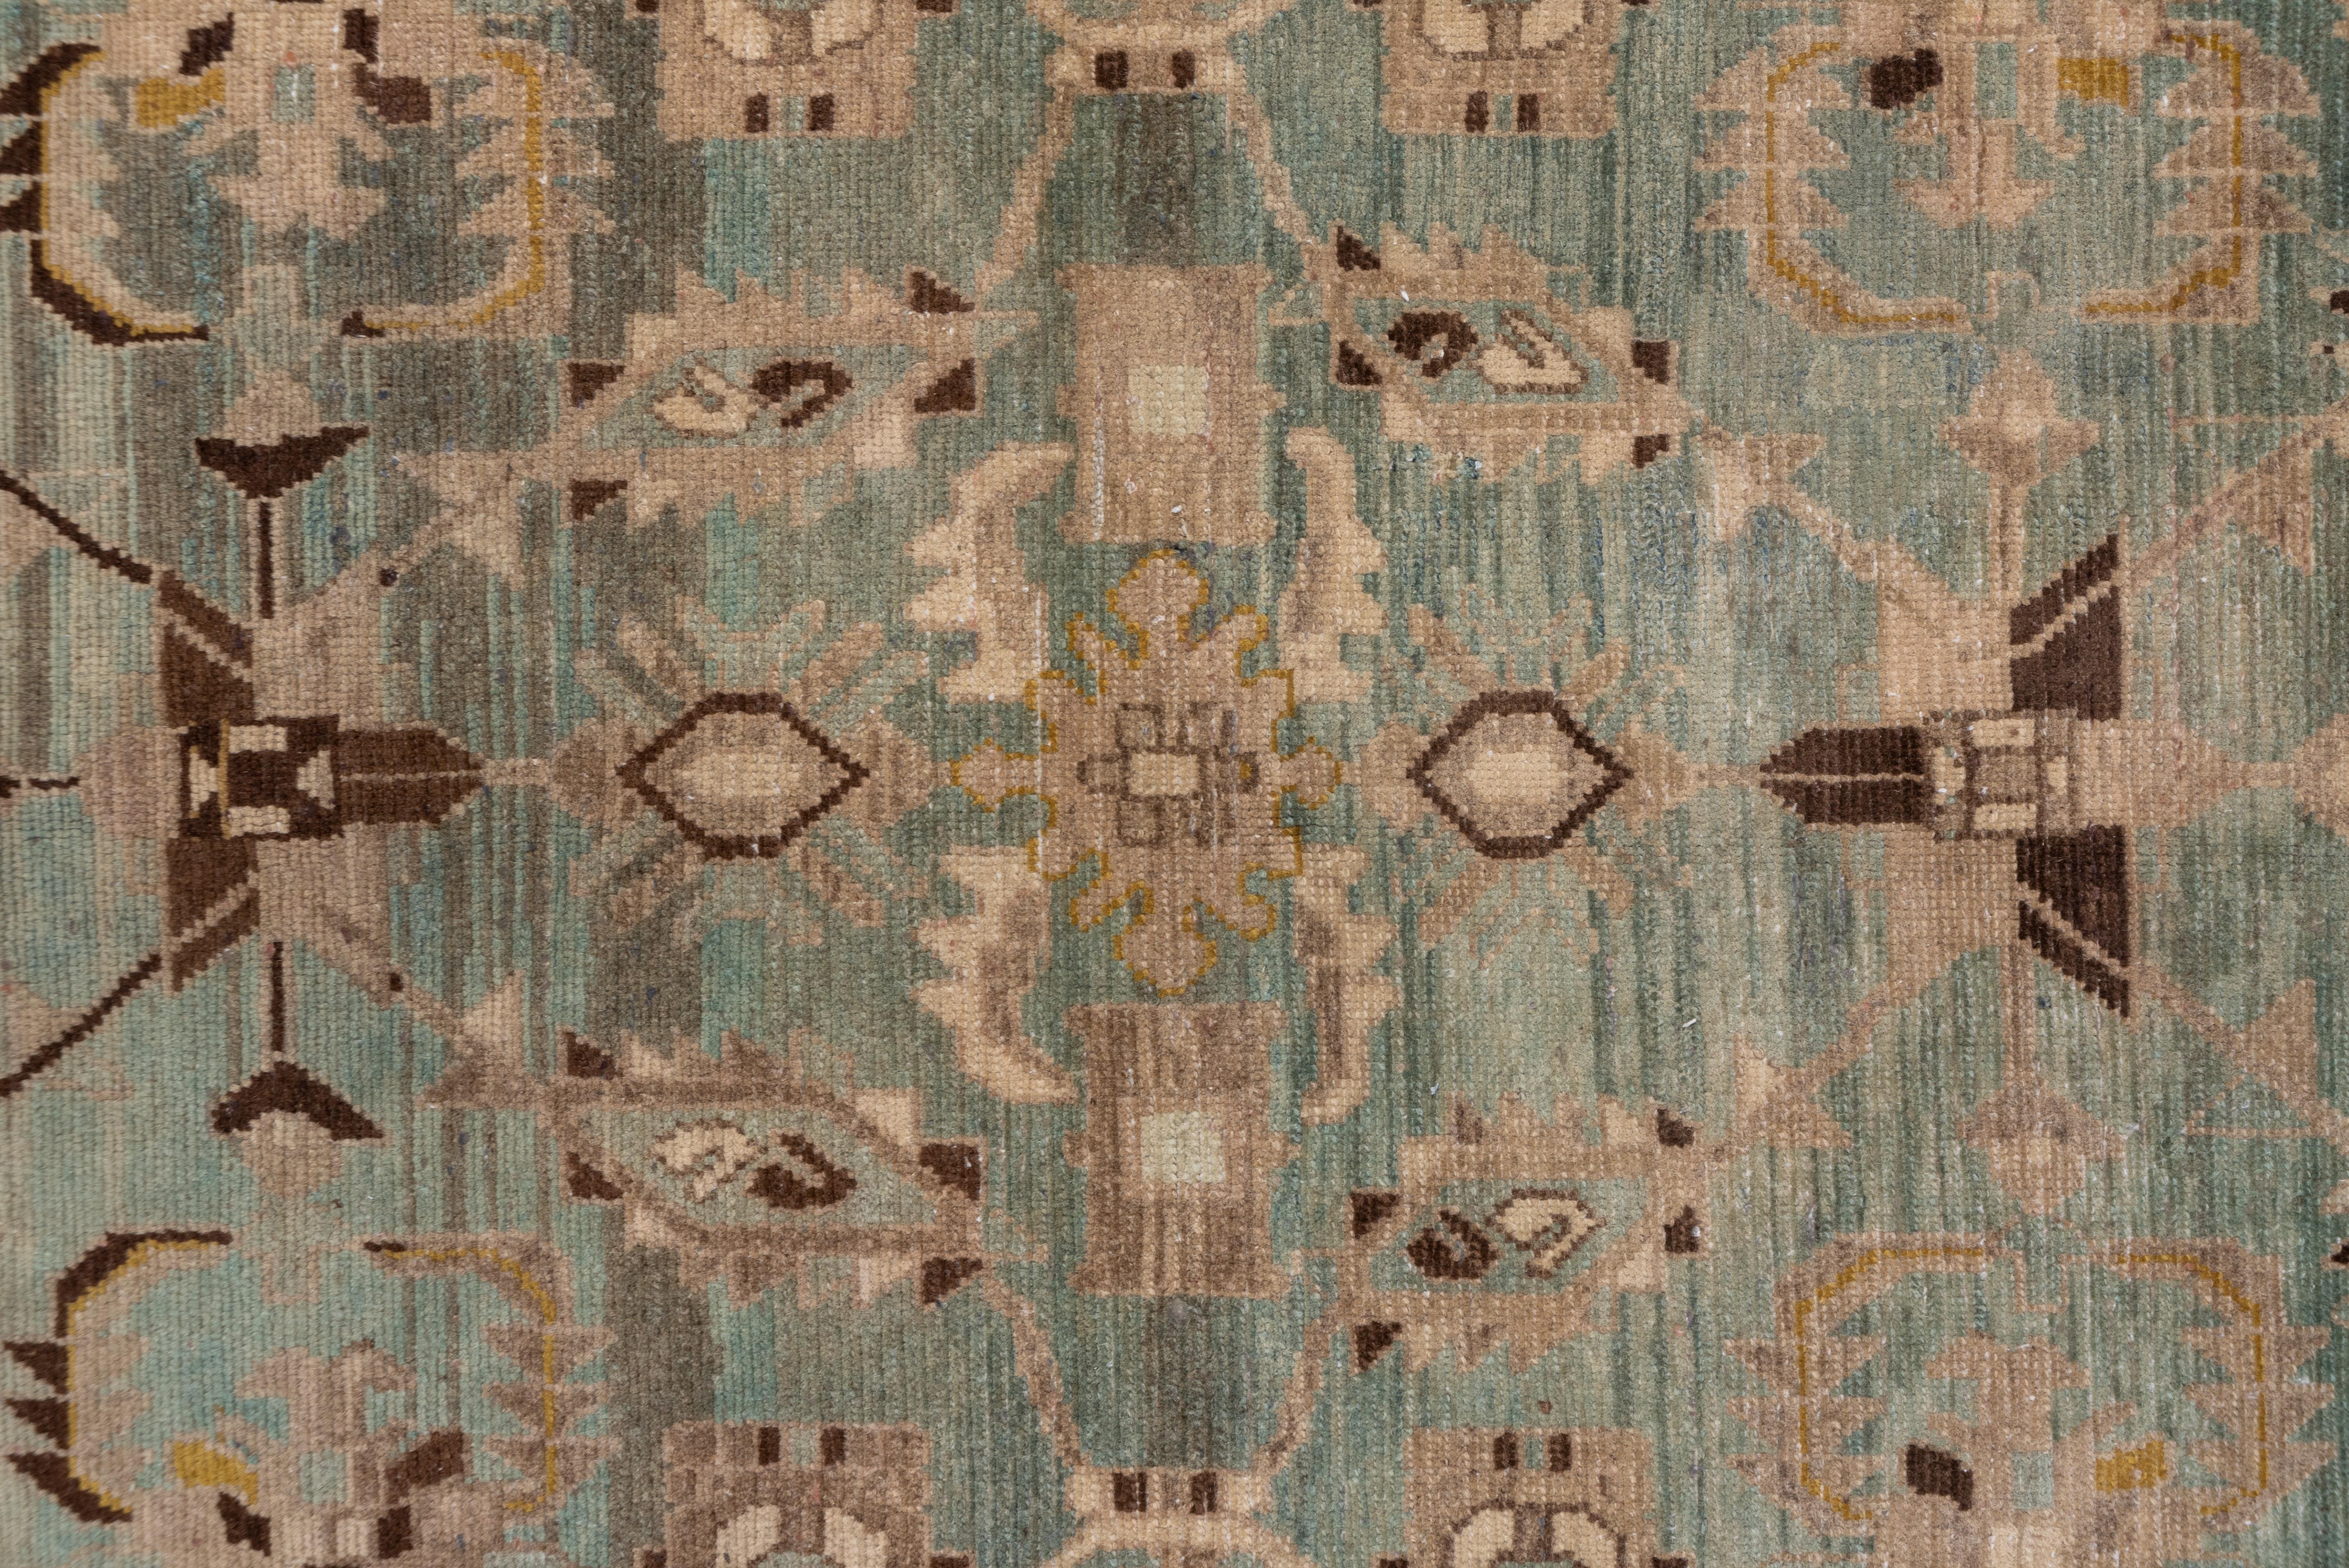 Dark brown accents are randomly distributed on this solidly woven west Persian scatter with an abrashed light grey field presenting octagons, squares, rhomboids and jagged leaves. Accents in goldenrod and rust appear, and the straw main border shows